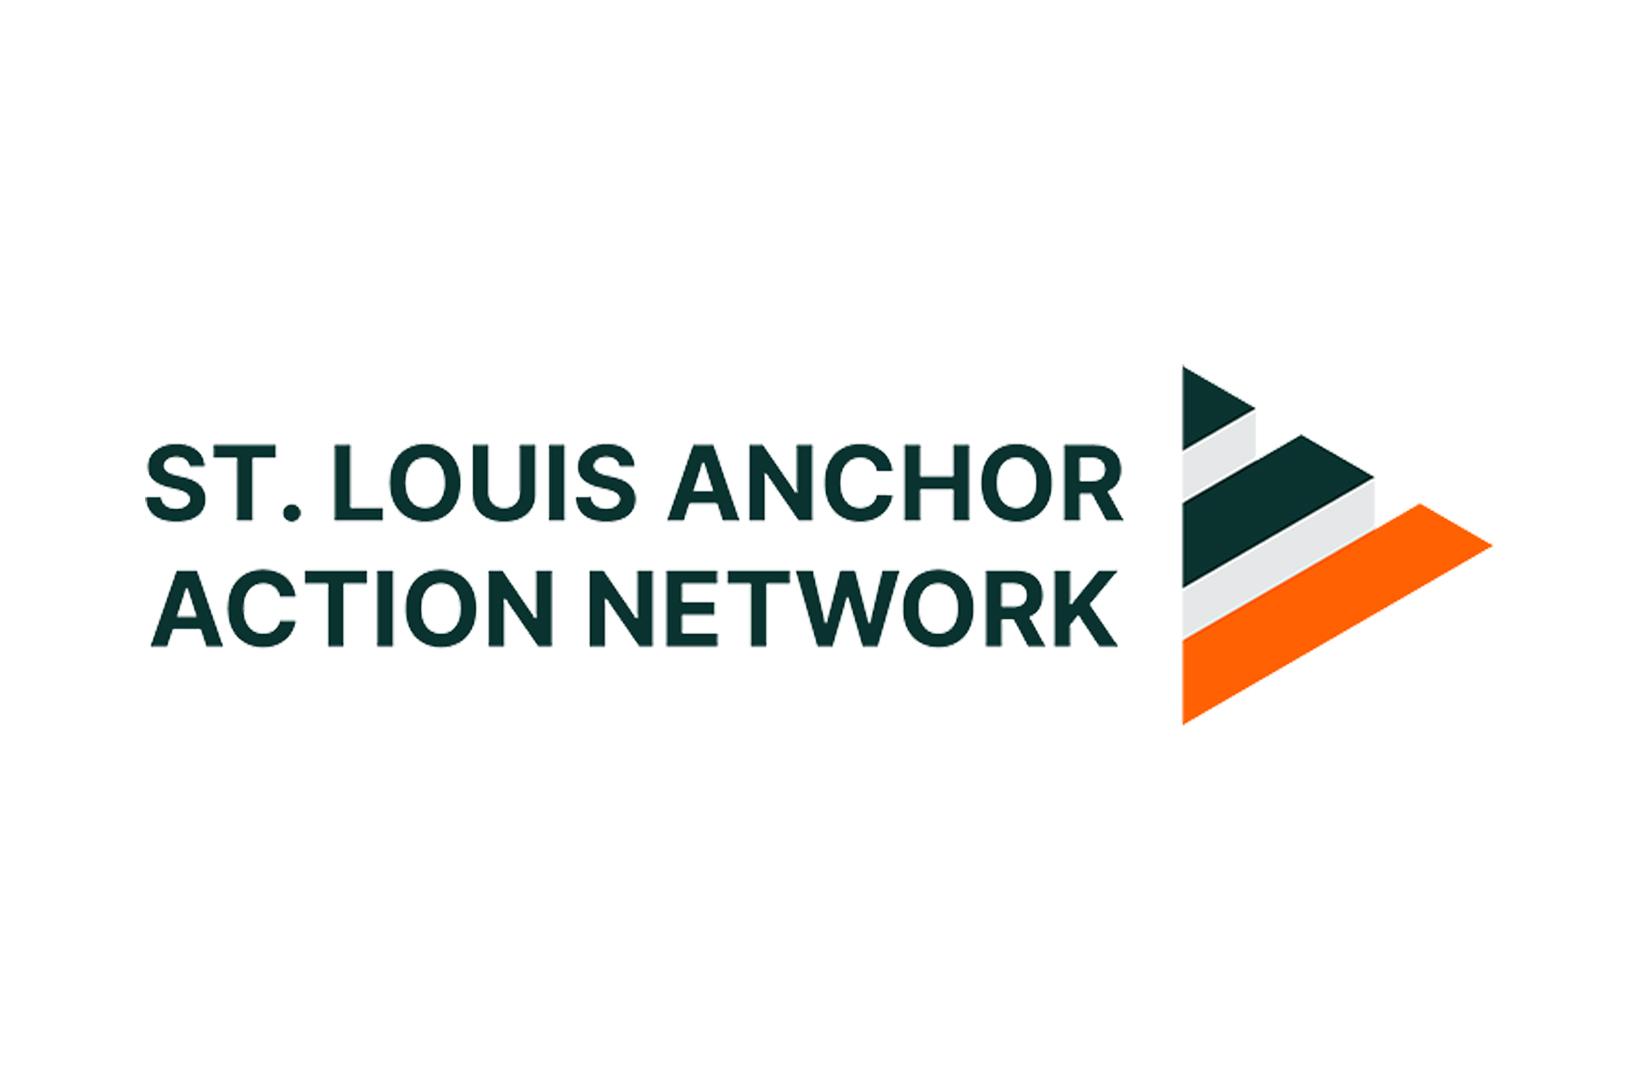 St. Louis Anchor Action Network logo